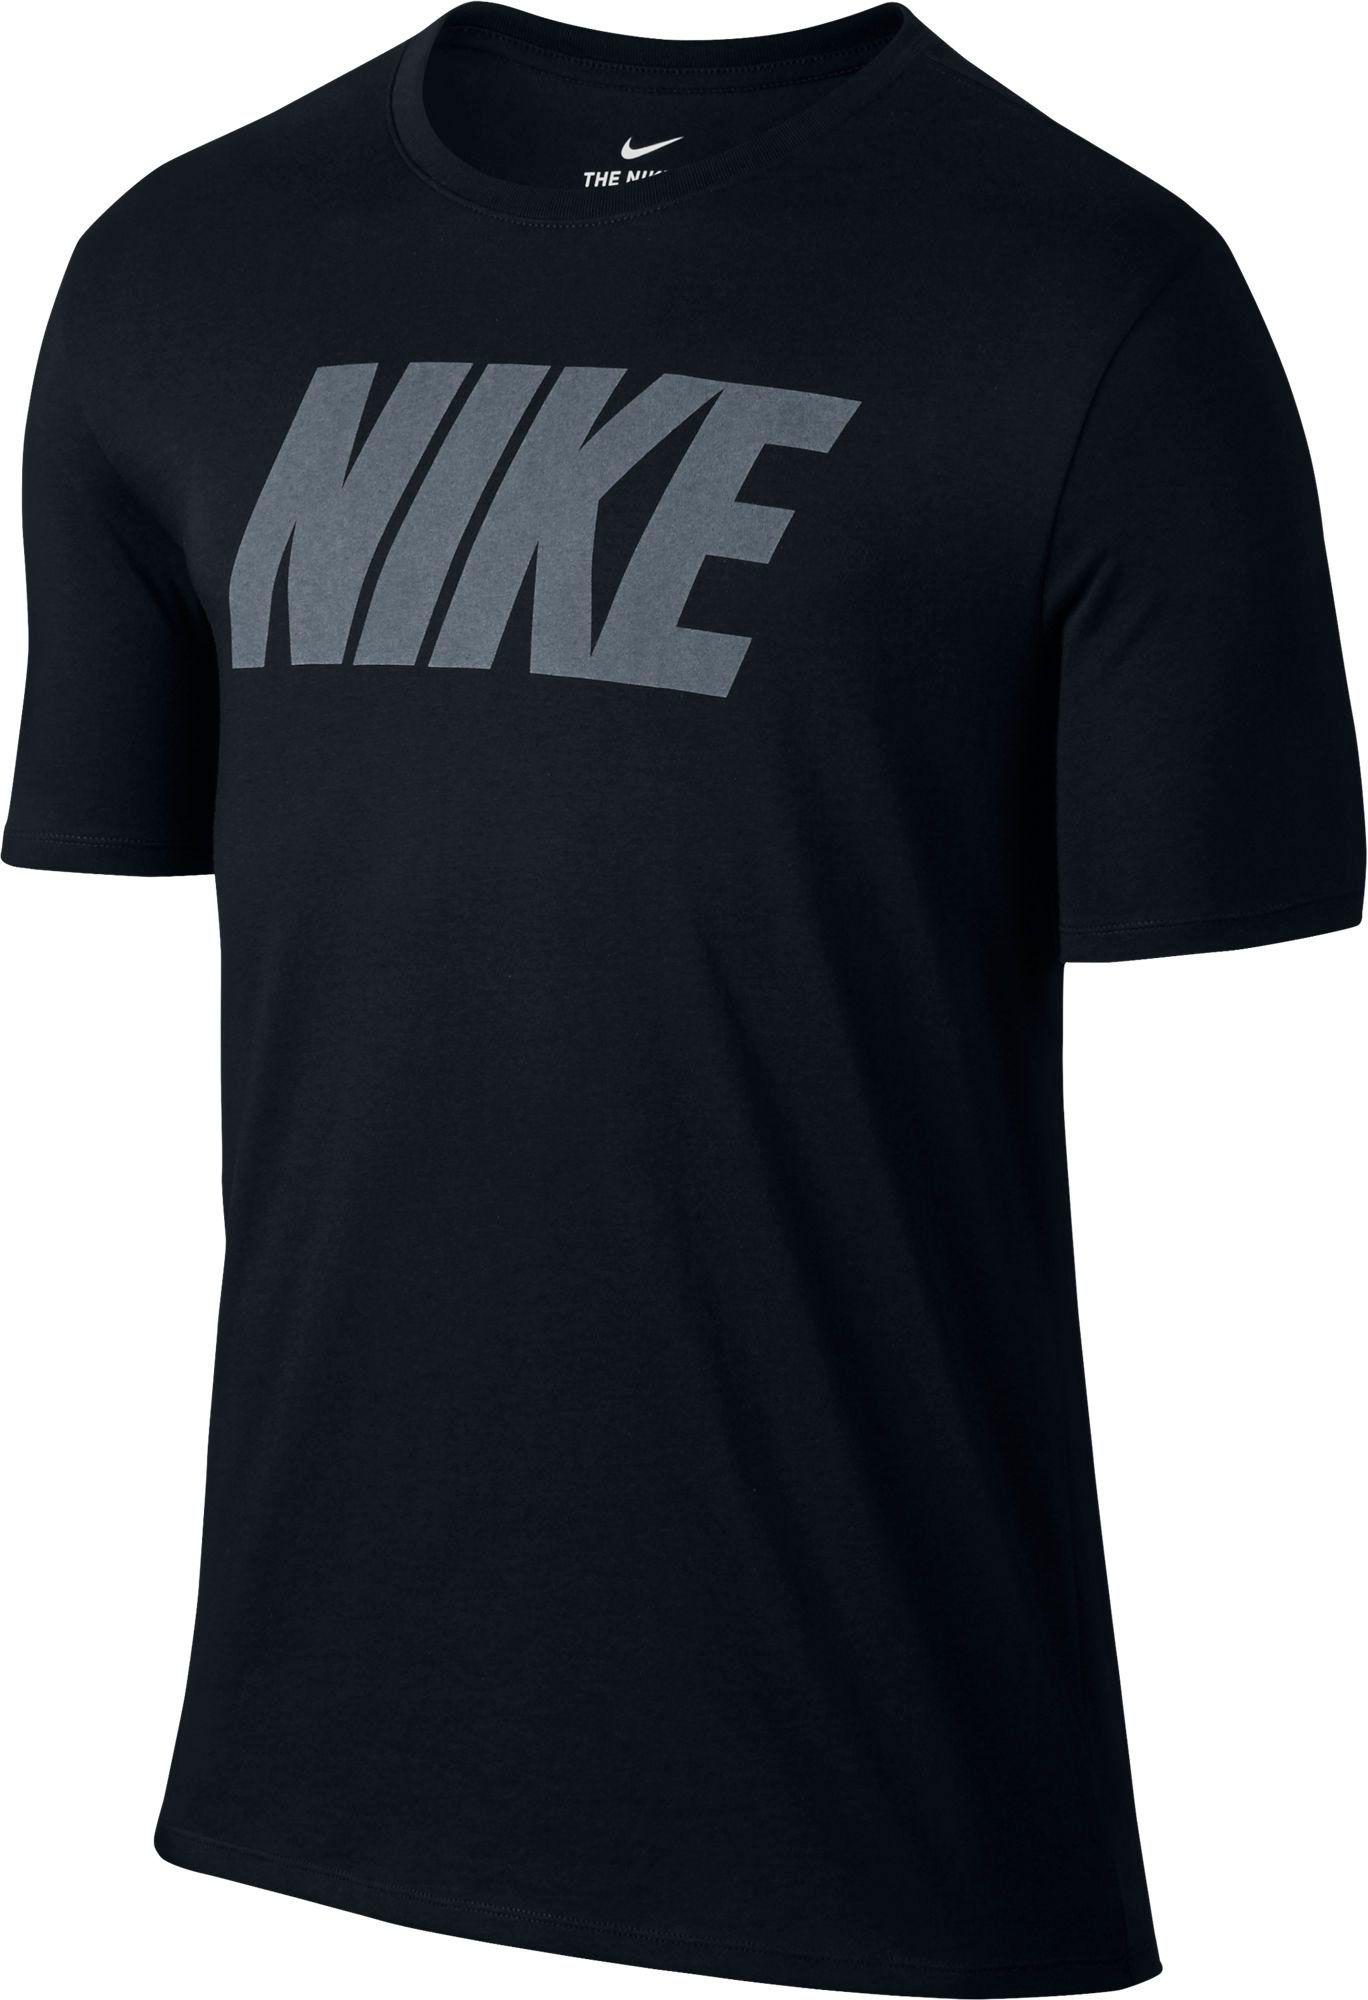 Lyst - Nike Dry Block Graphic T-shirt in Black for Men